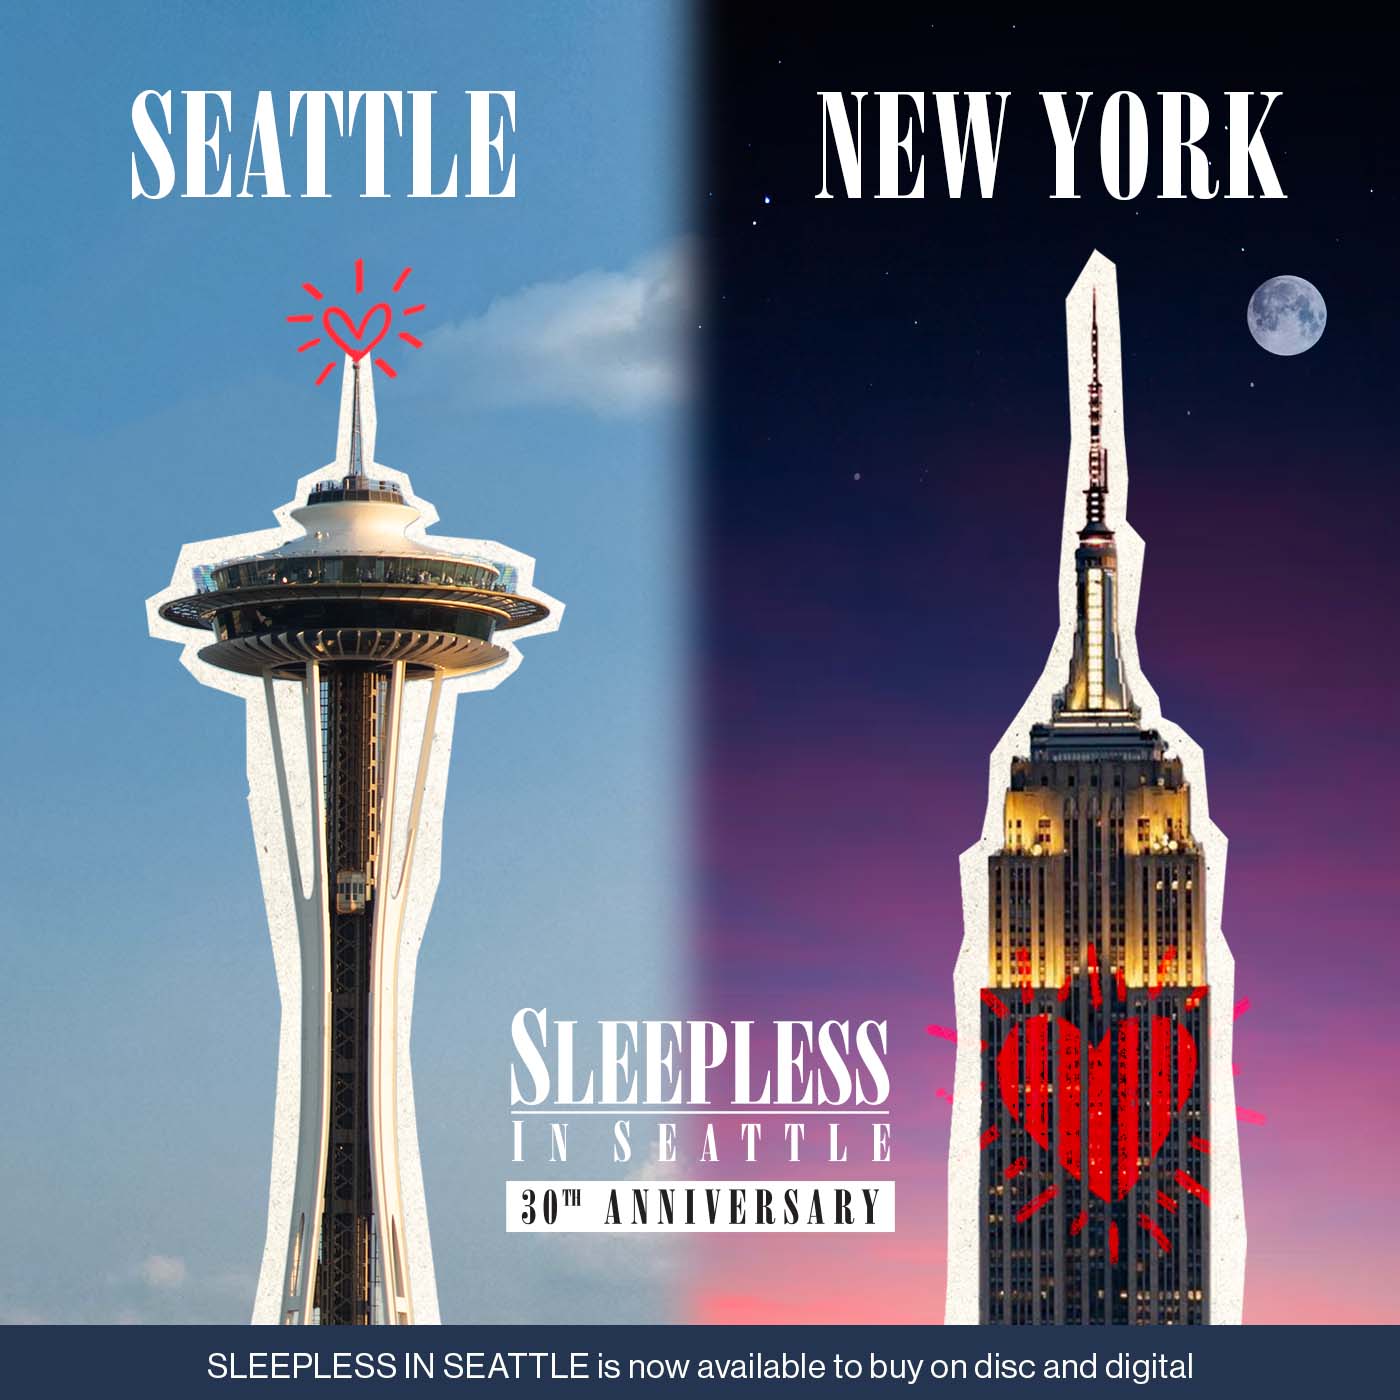 Decorative image. Seattle Space Needle and New York Empire State Building. Text: SLEEPLESS IN SEATTLE is now available to buy on disc and digital